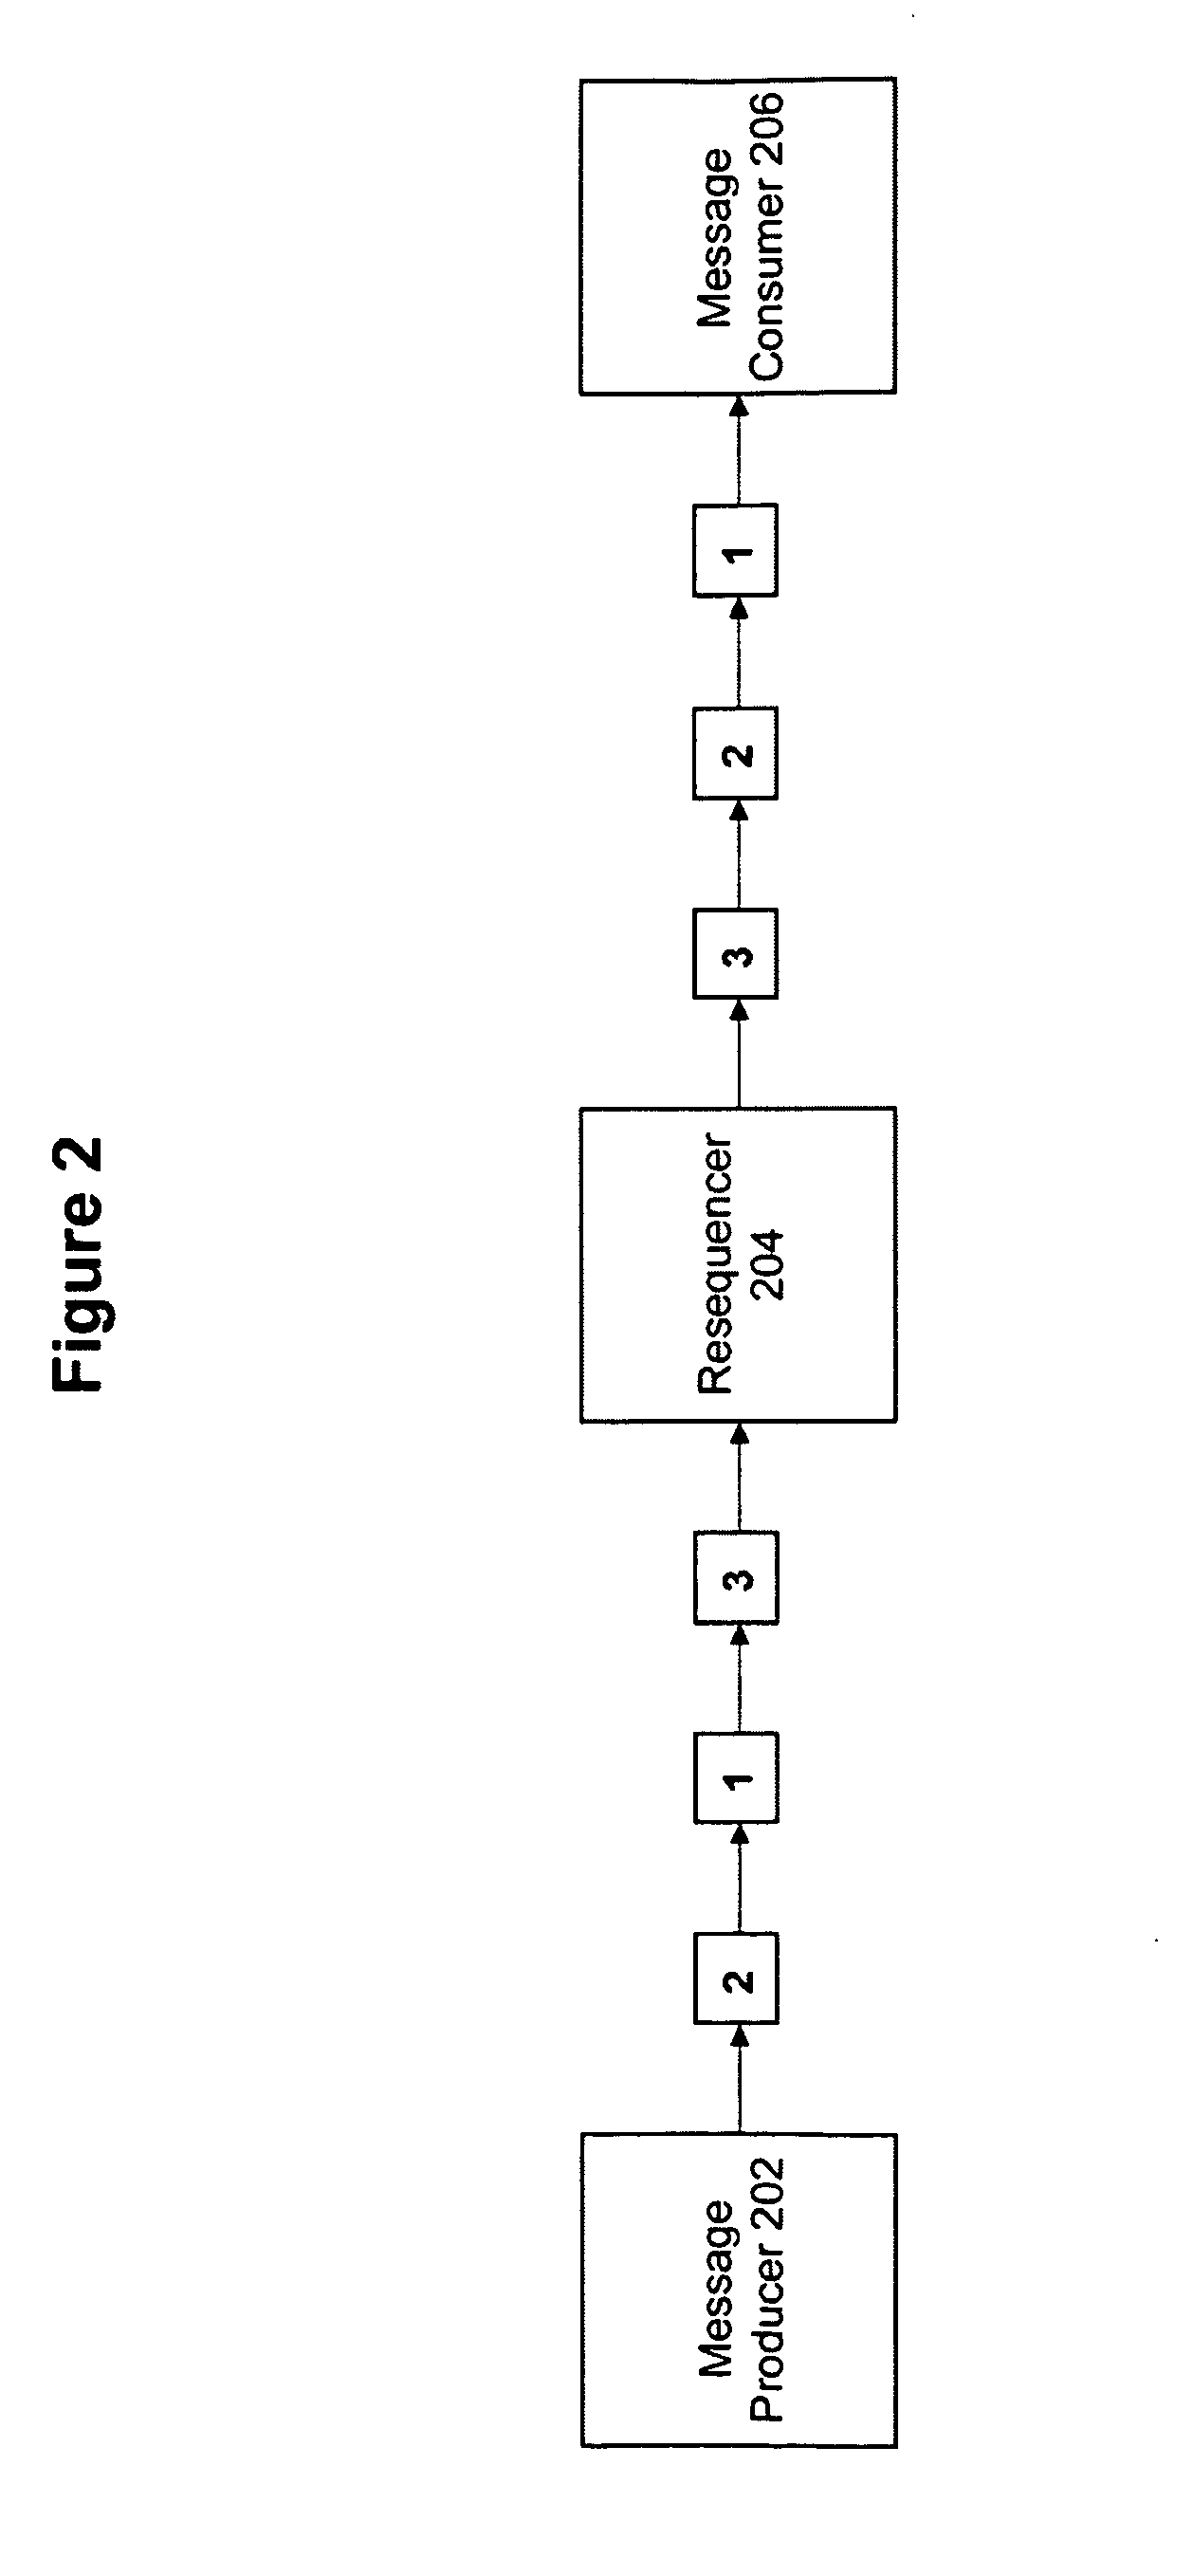 Method and system for performing blocking of messages on errors in message stream